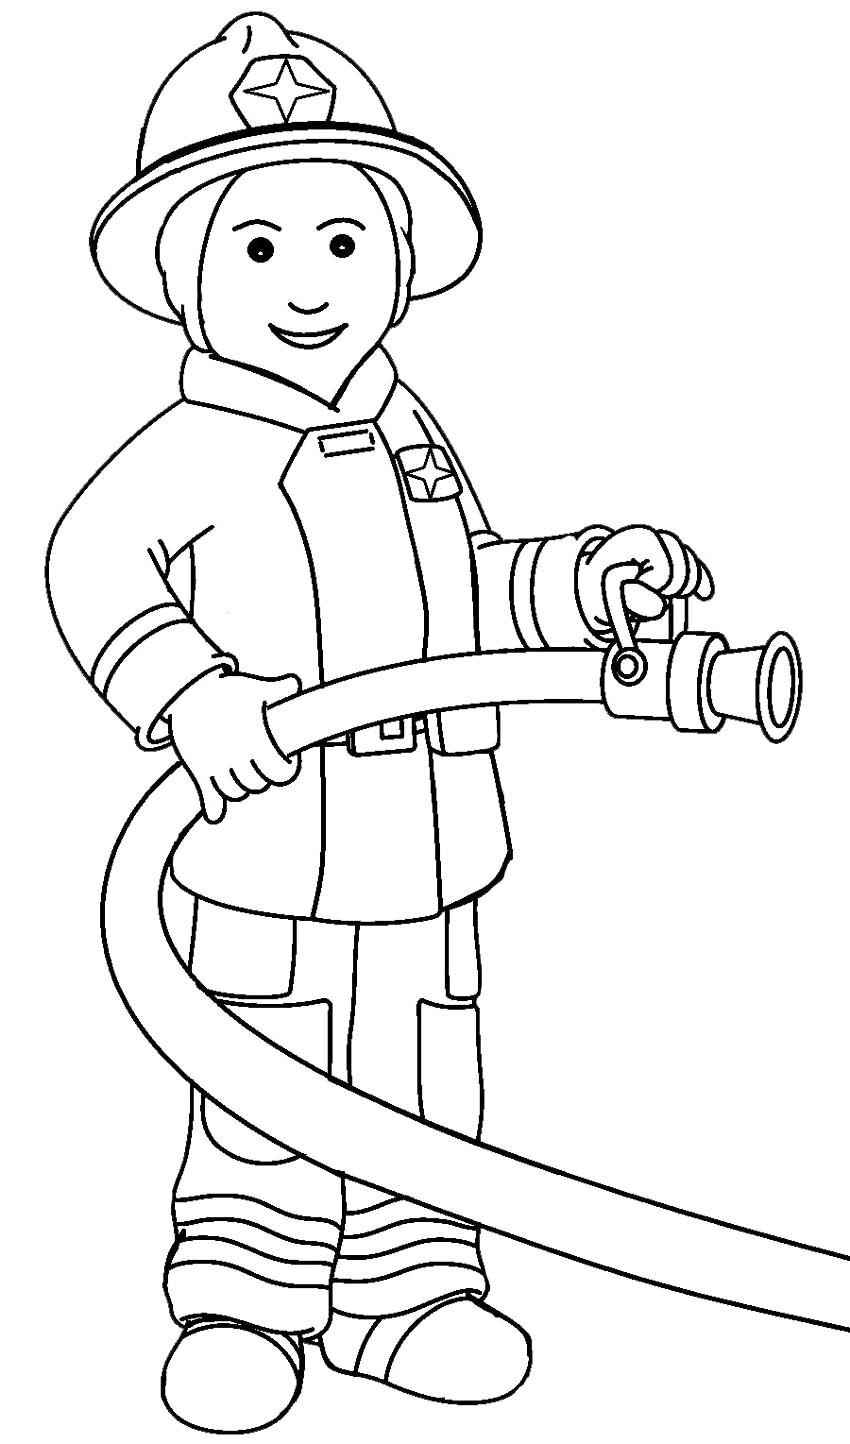 Occupation Coloring Pages at GetColorings.com | Free printable